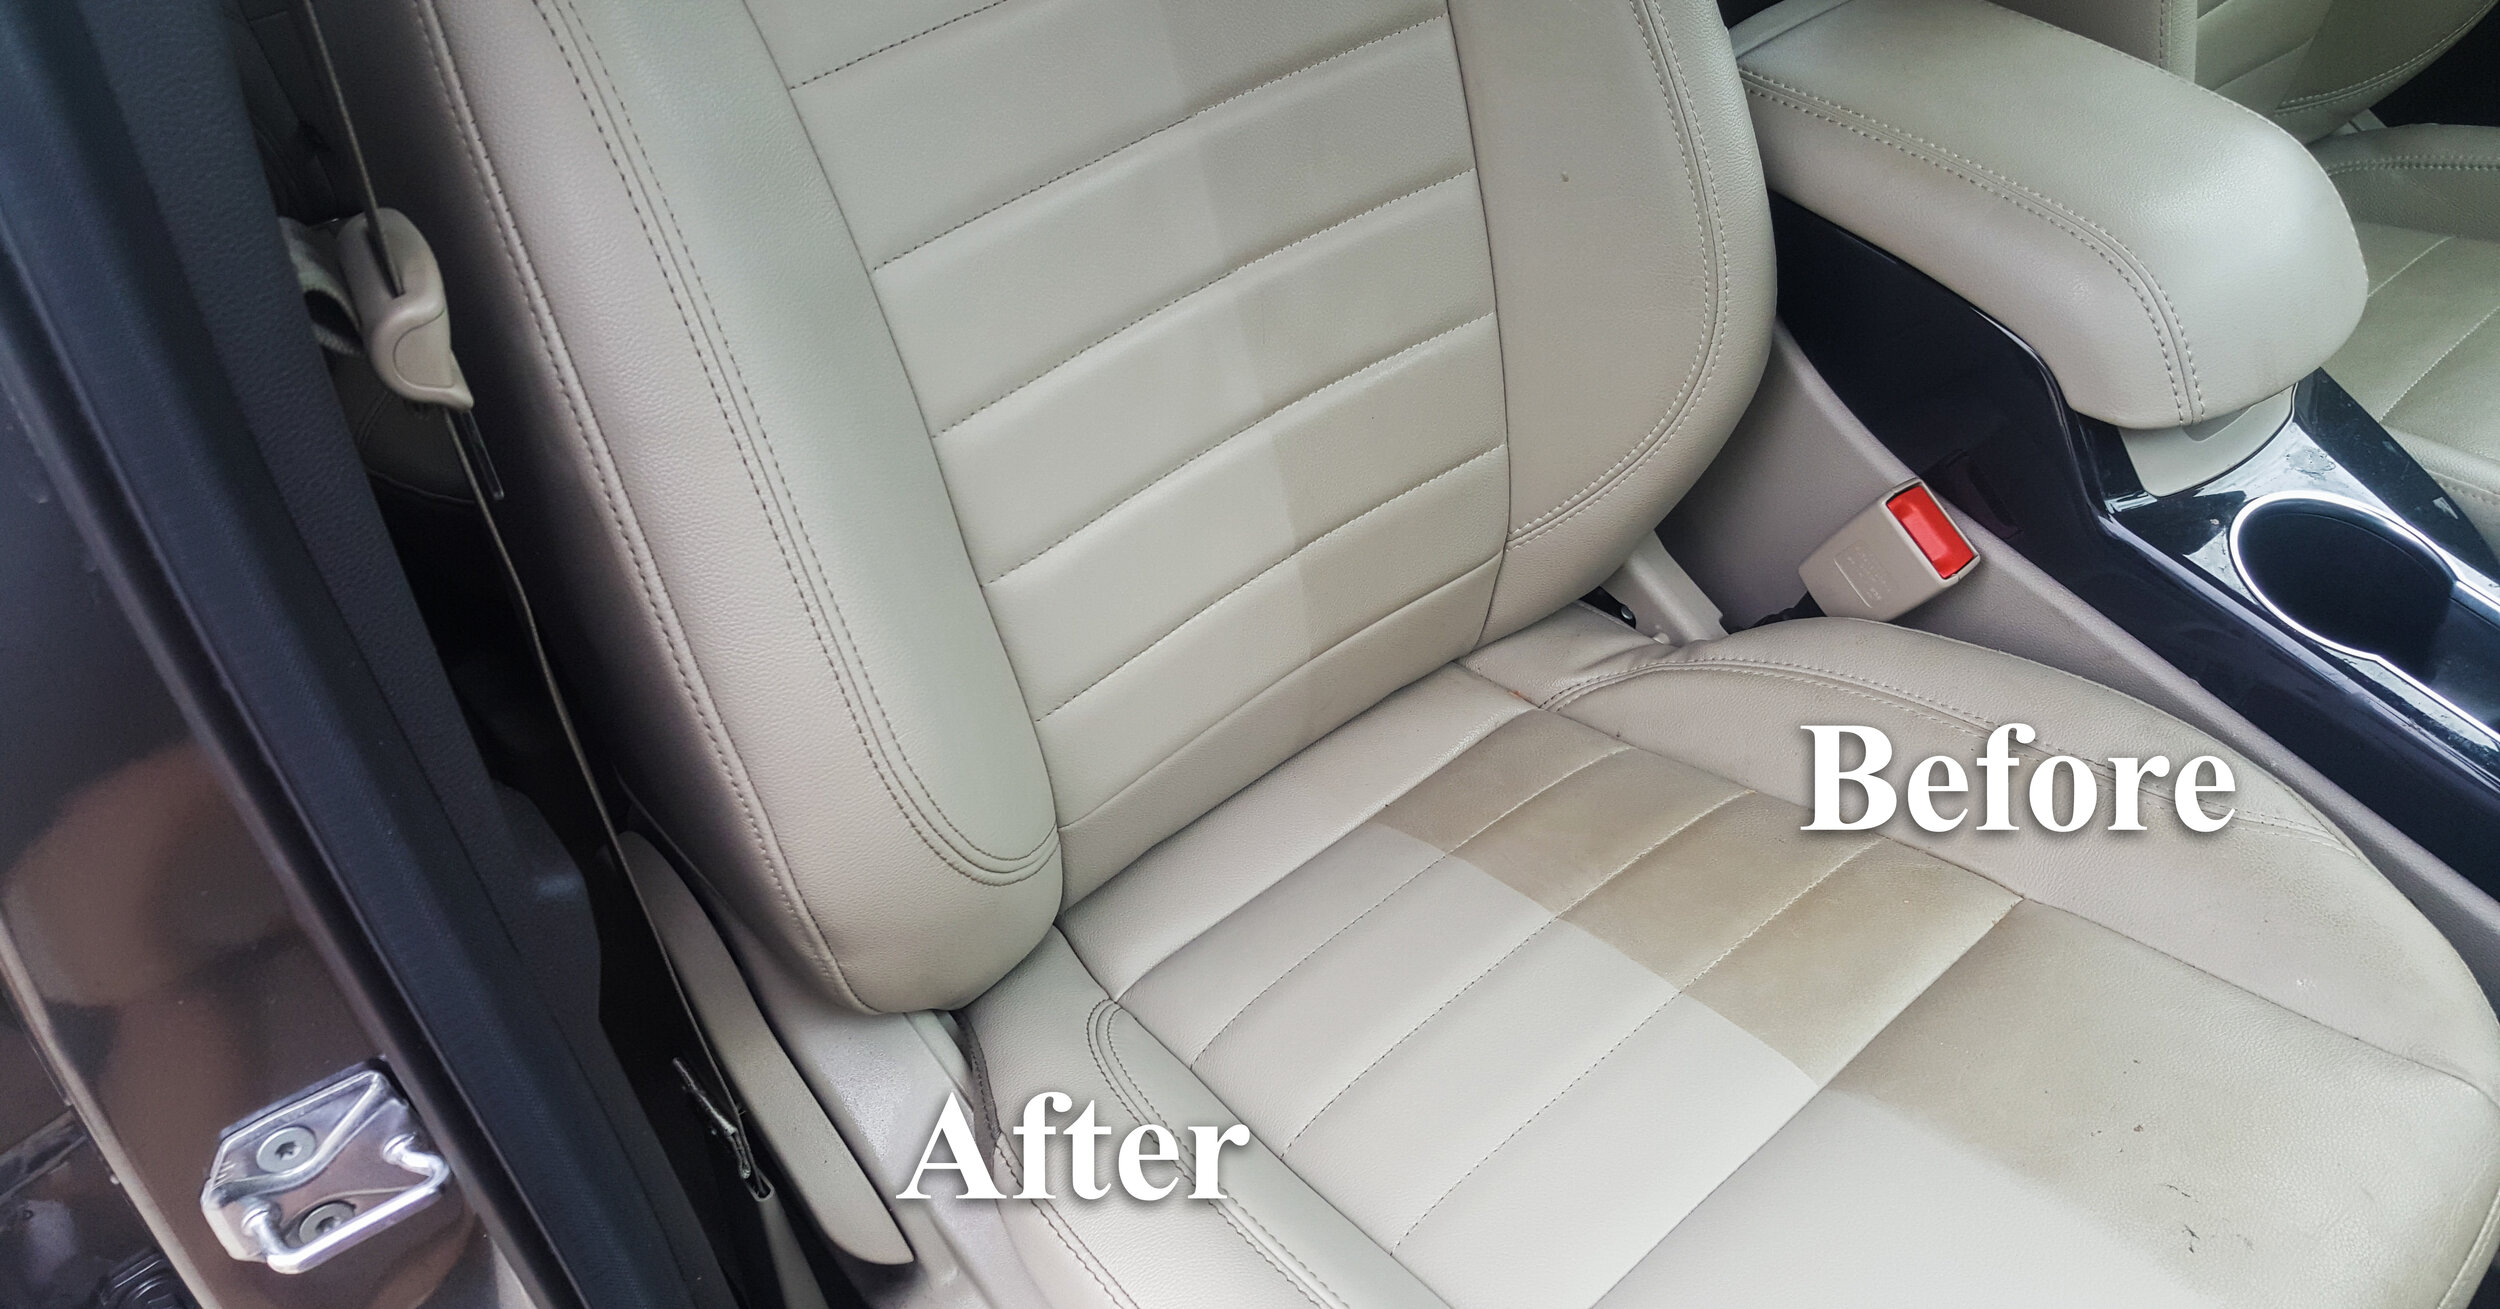 How To Clean Leather Car Seats At Home Easily!